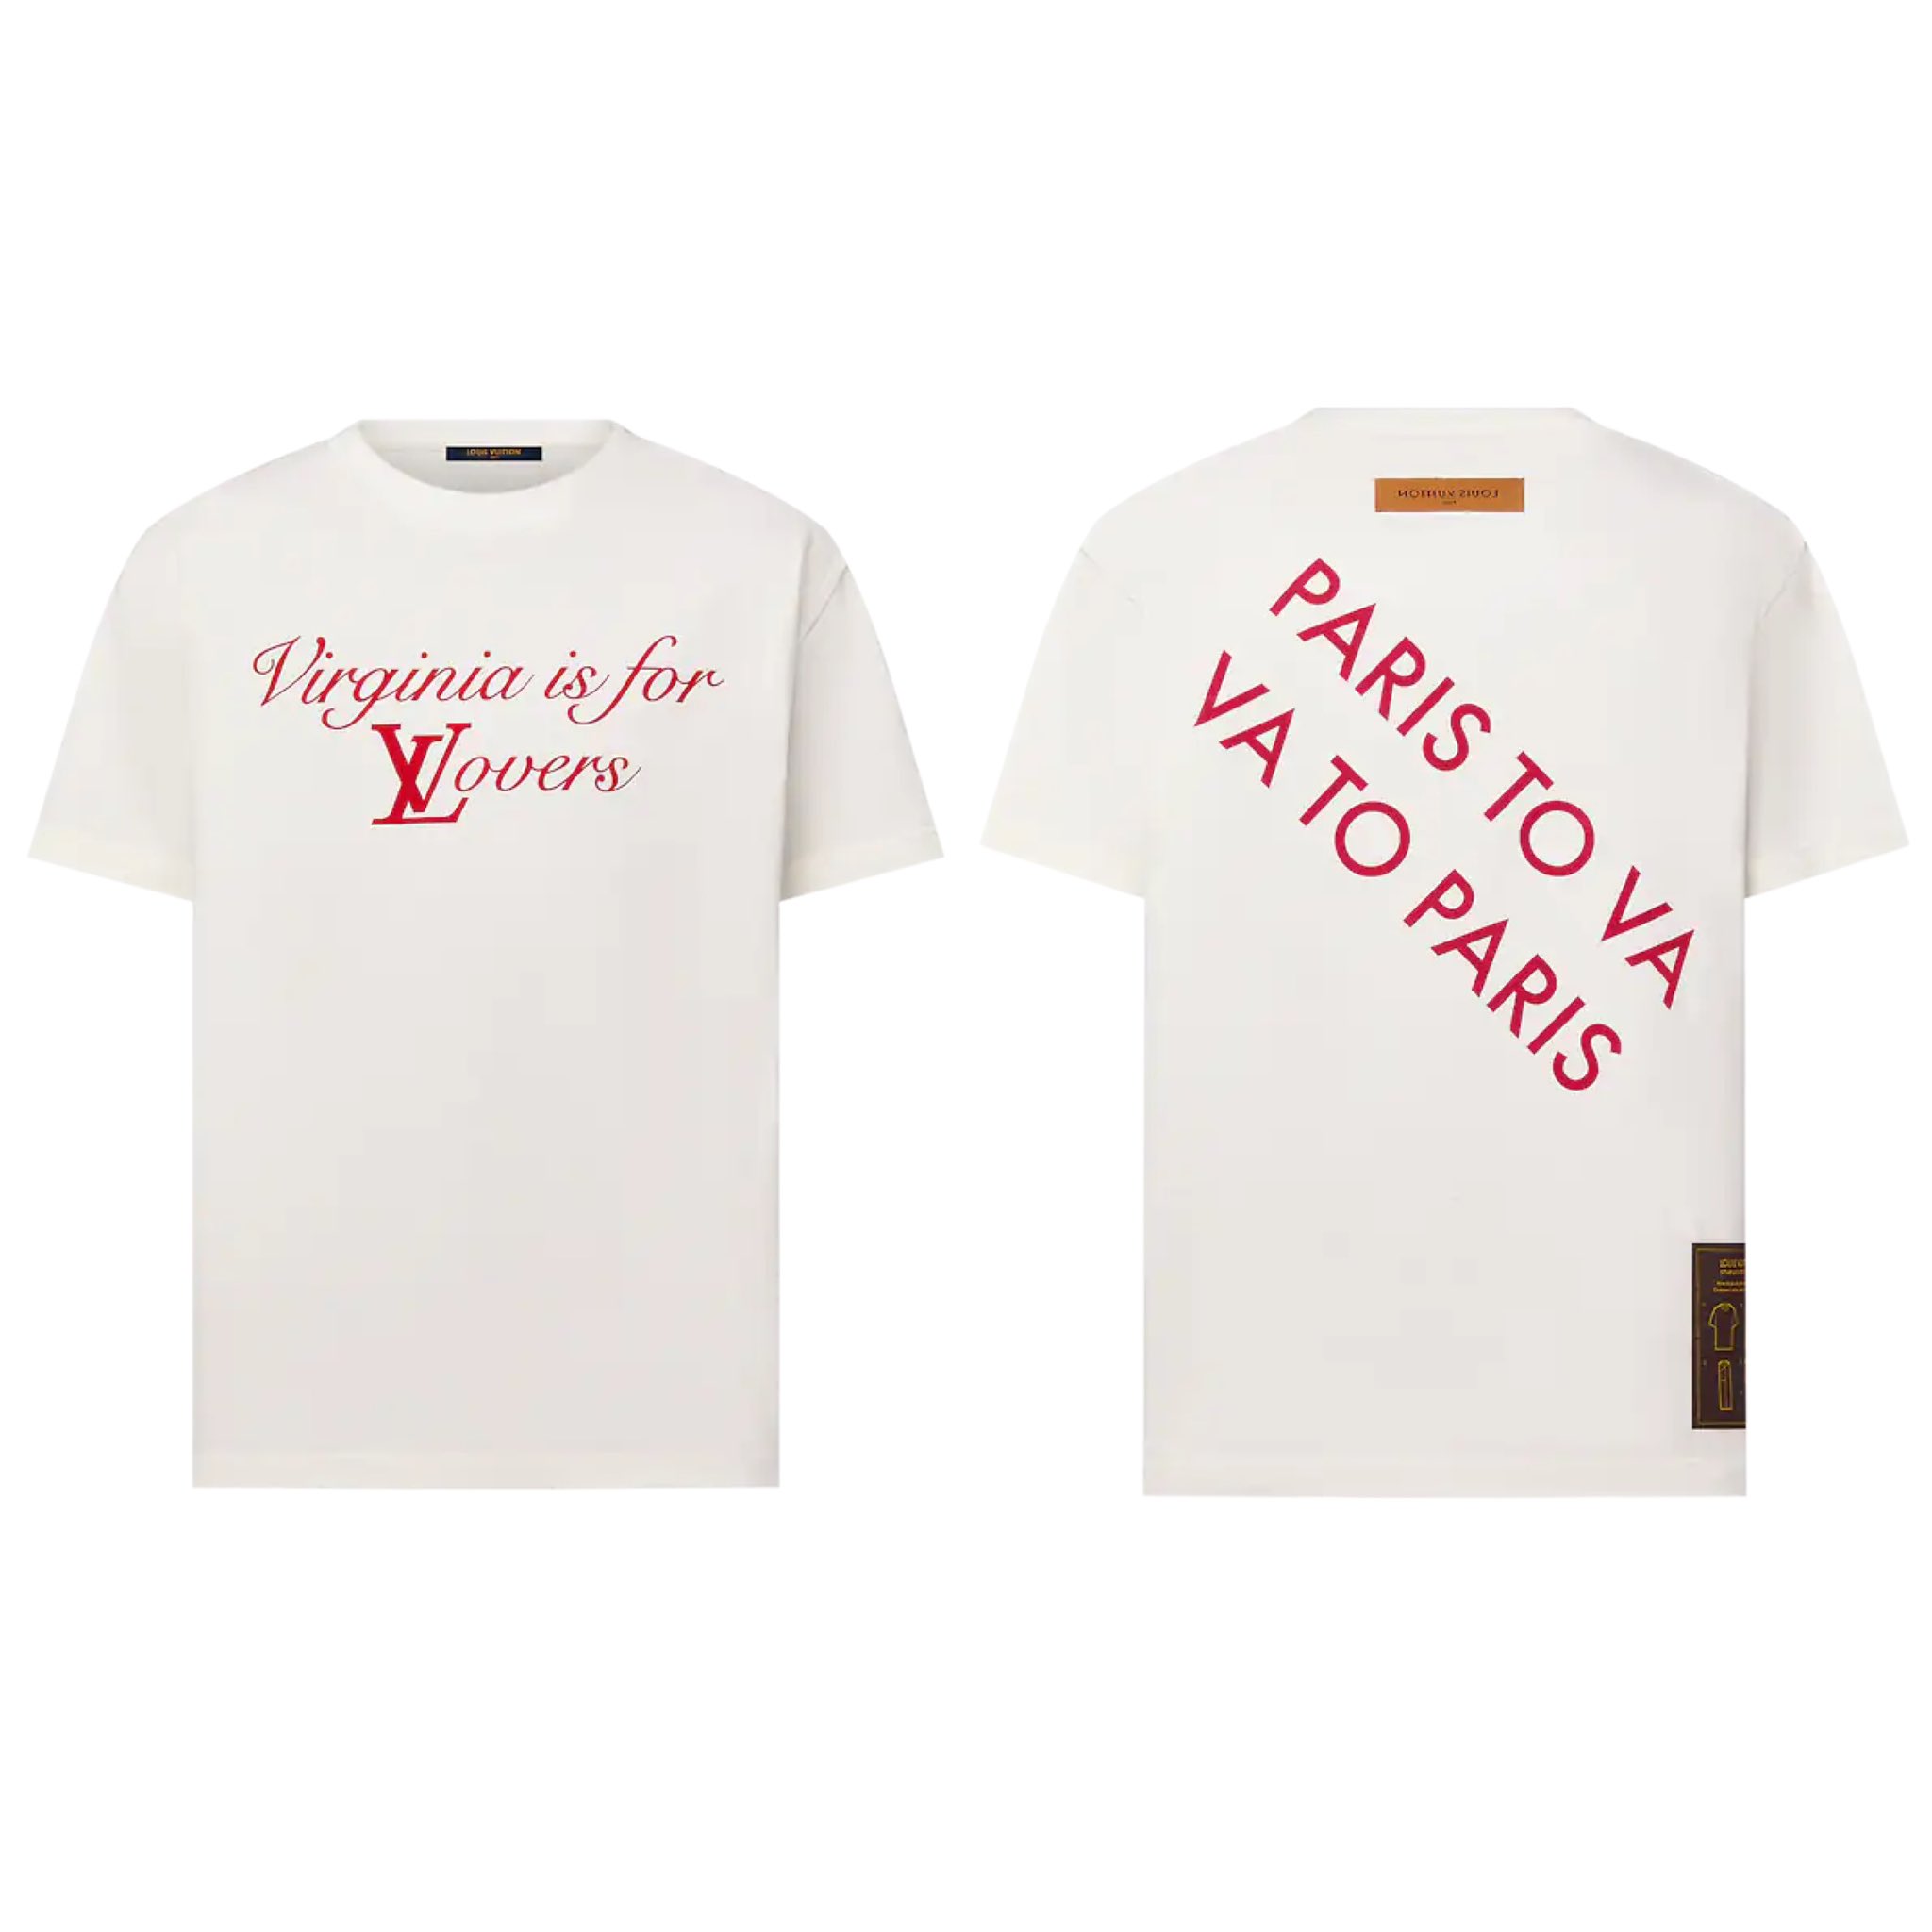 Louis Vuitton x Something in the Water VA Is For Lovers Printed T